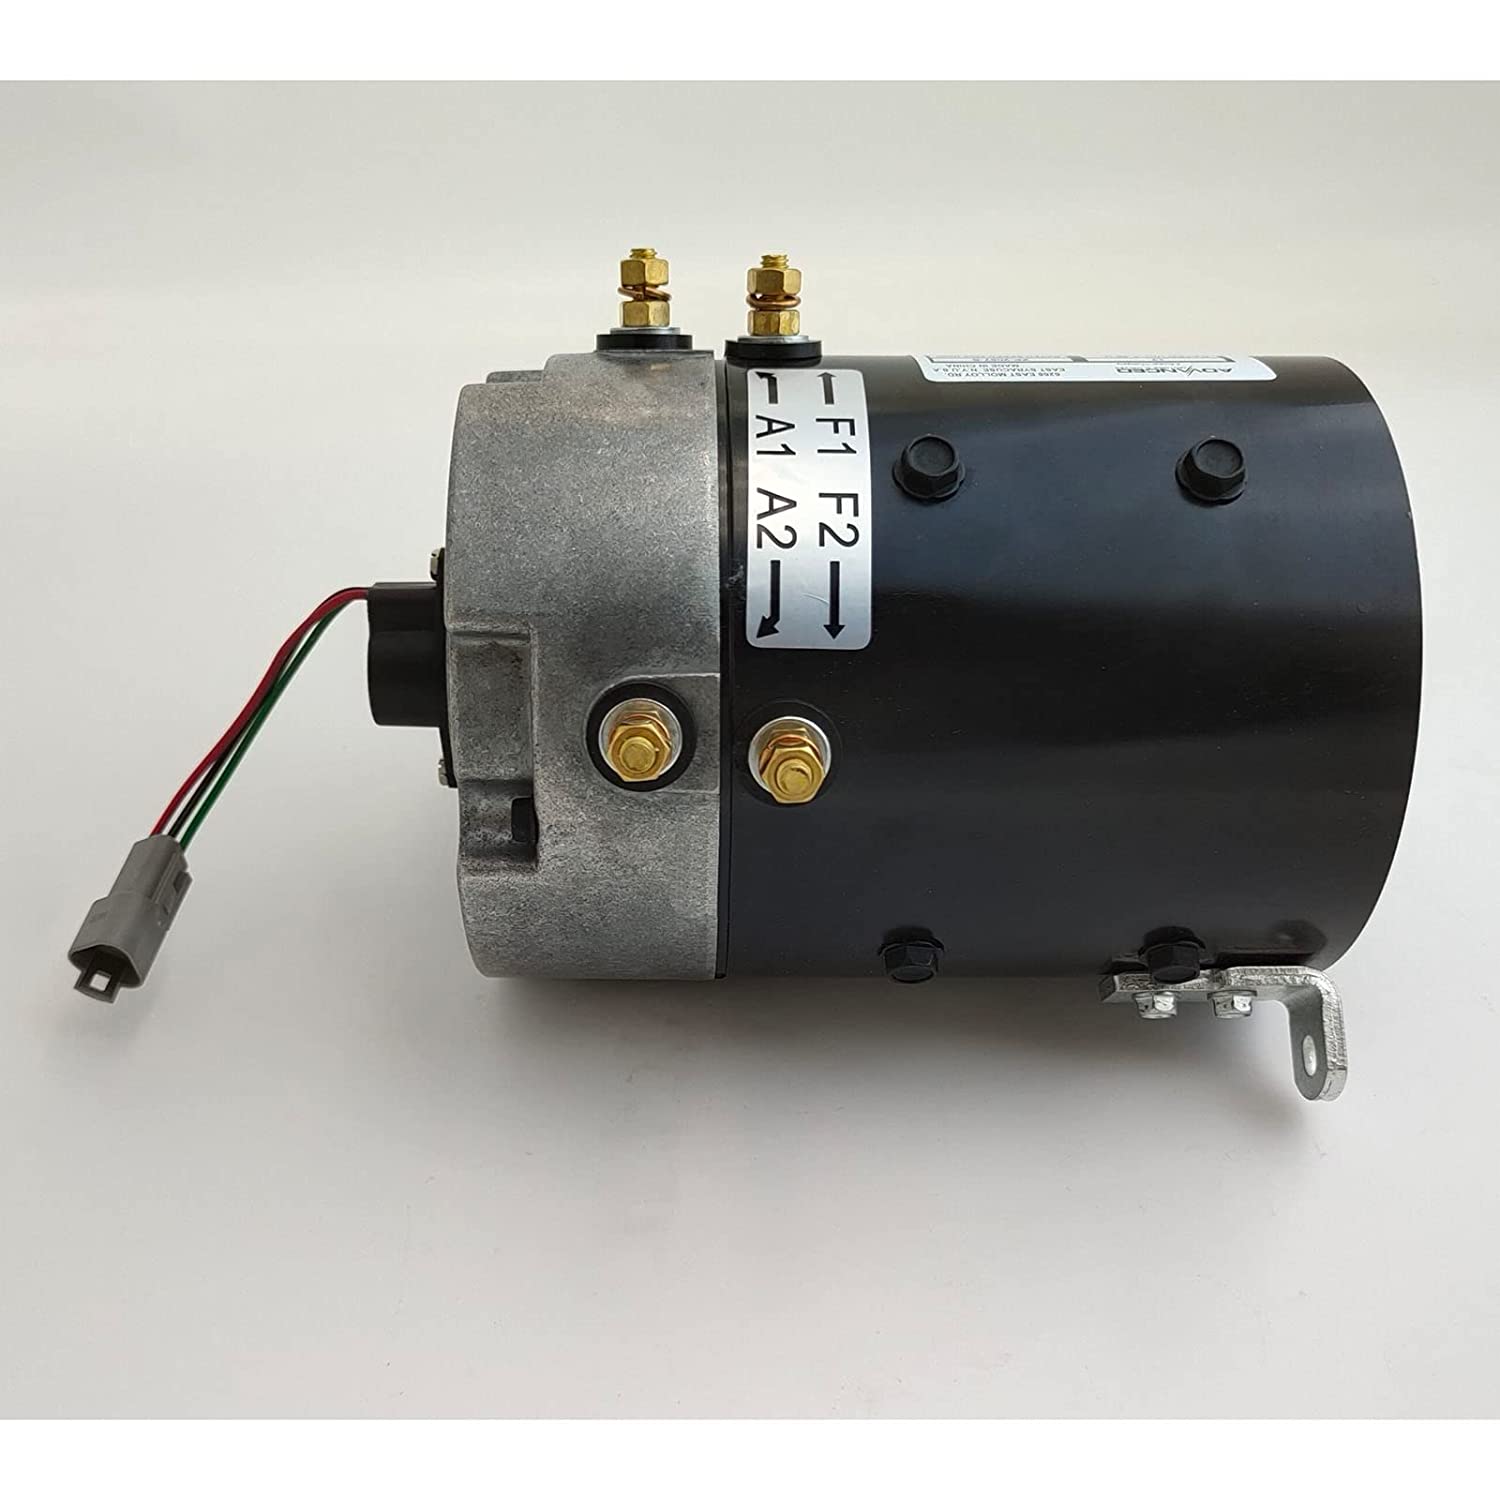 Seapple 48V DC XP-2067-S Electric Drive Motor Compatible with SepEx Motor ZQS48-3.7-T-GN 103572501 1035725-01 102240102 3.7 kW Electric Vehicle Club Car Golf Cart - image 2 of 6